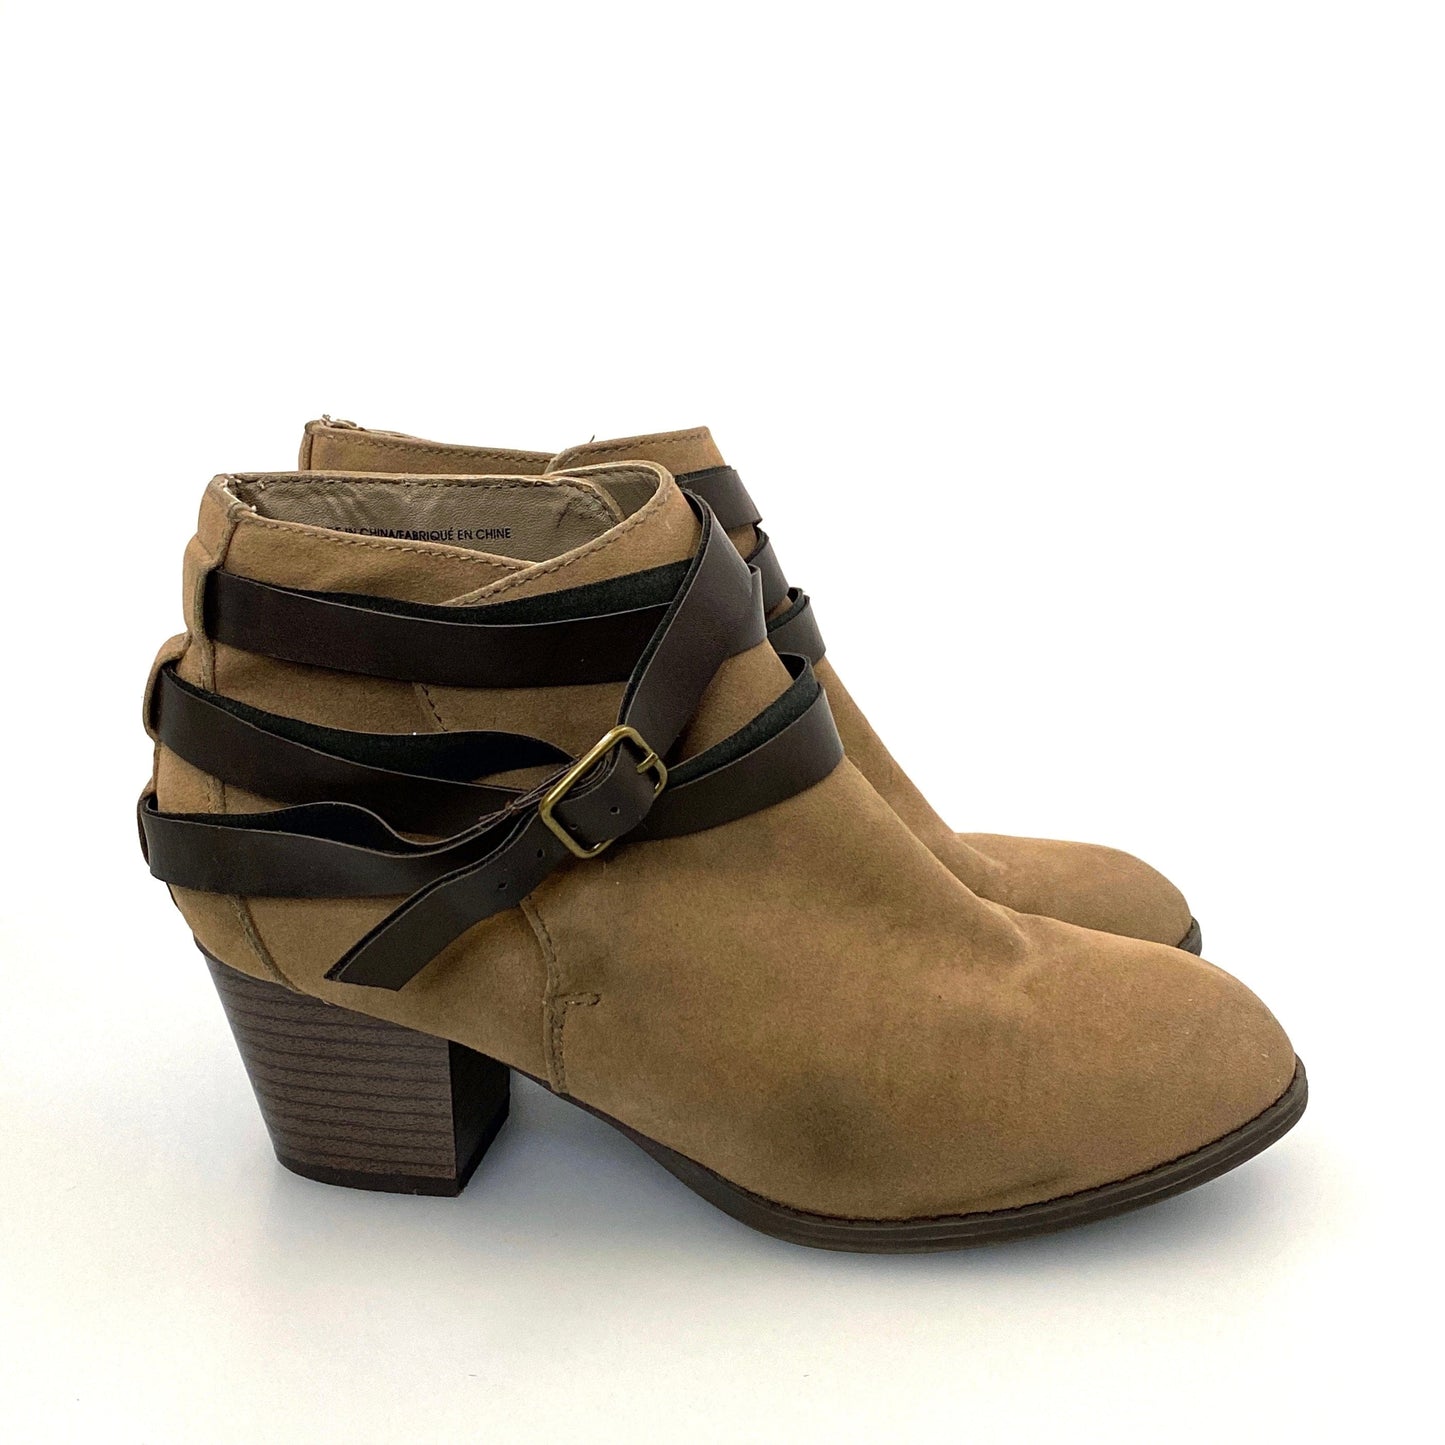 Mossimo Supply Womens Size 8 Brown Suede Strap Buckle Ankle Booties Boots